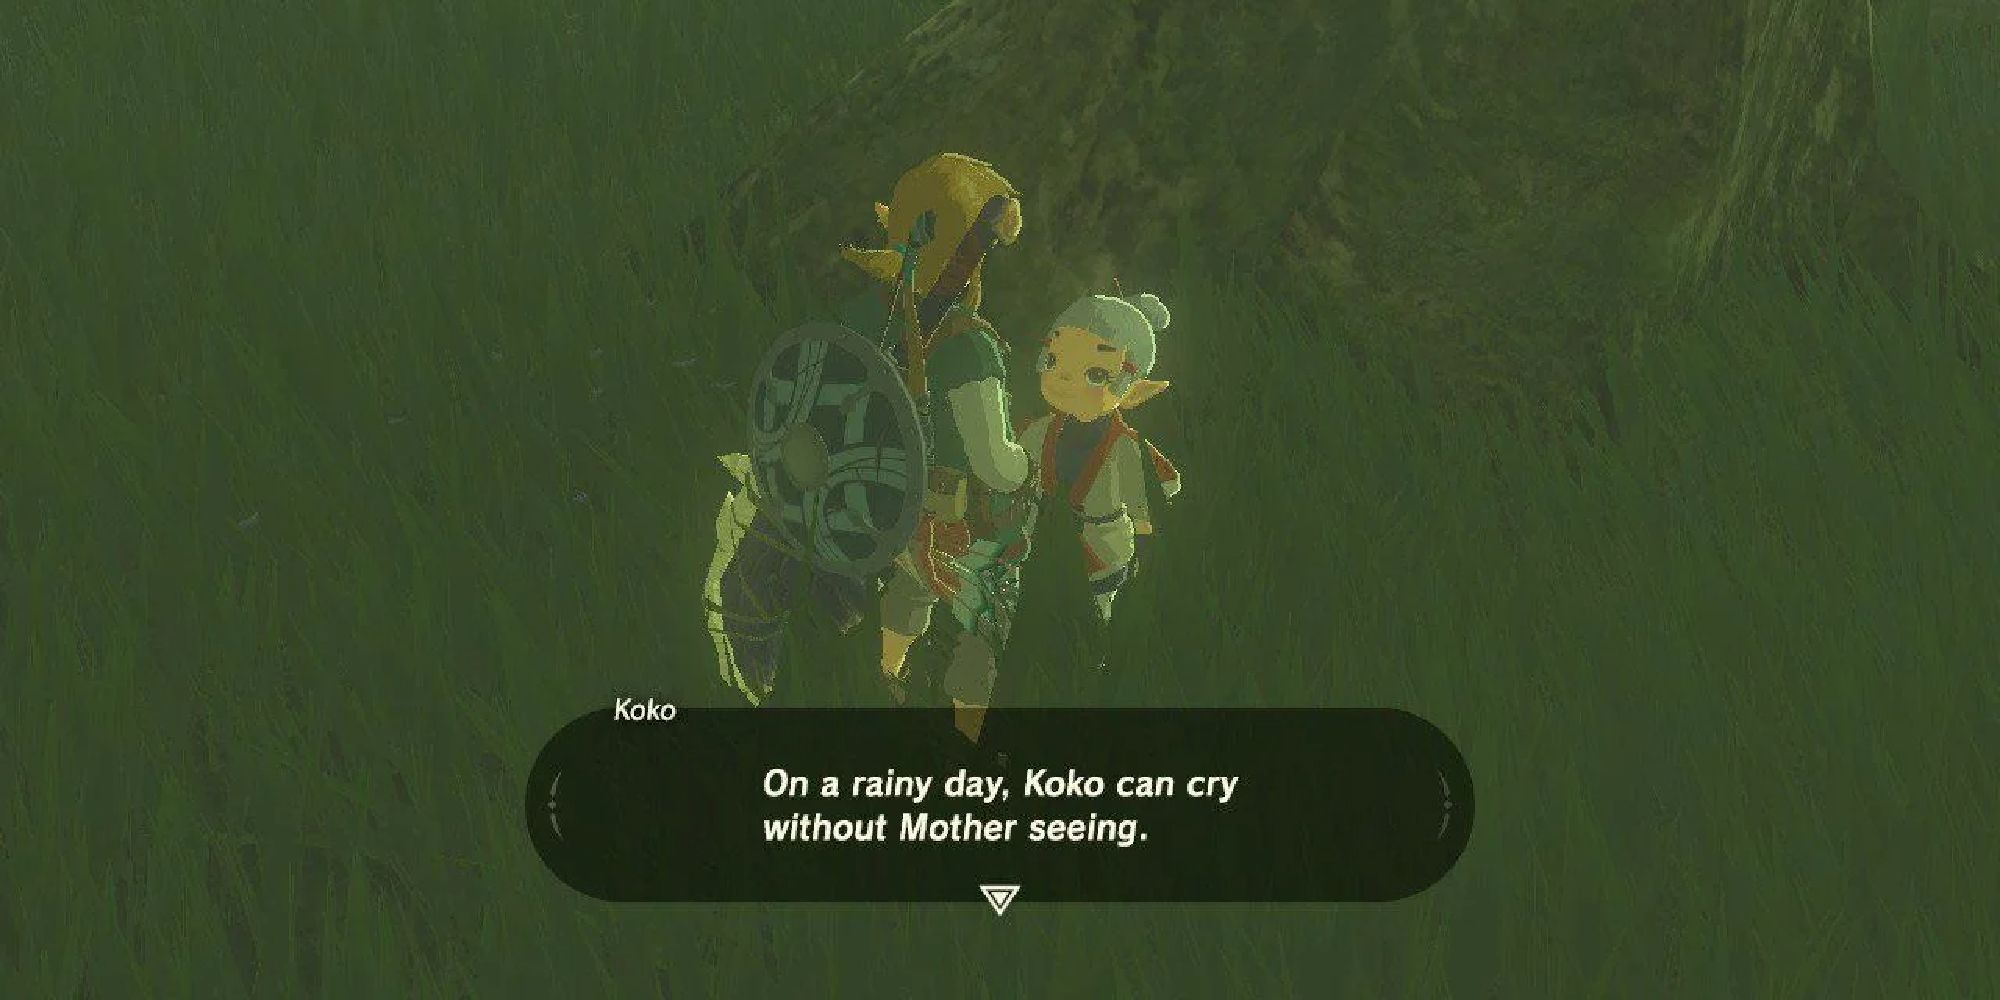 Link talking to Koko, who tells him that when it rains, she can cry without her mother seeing